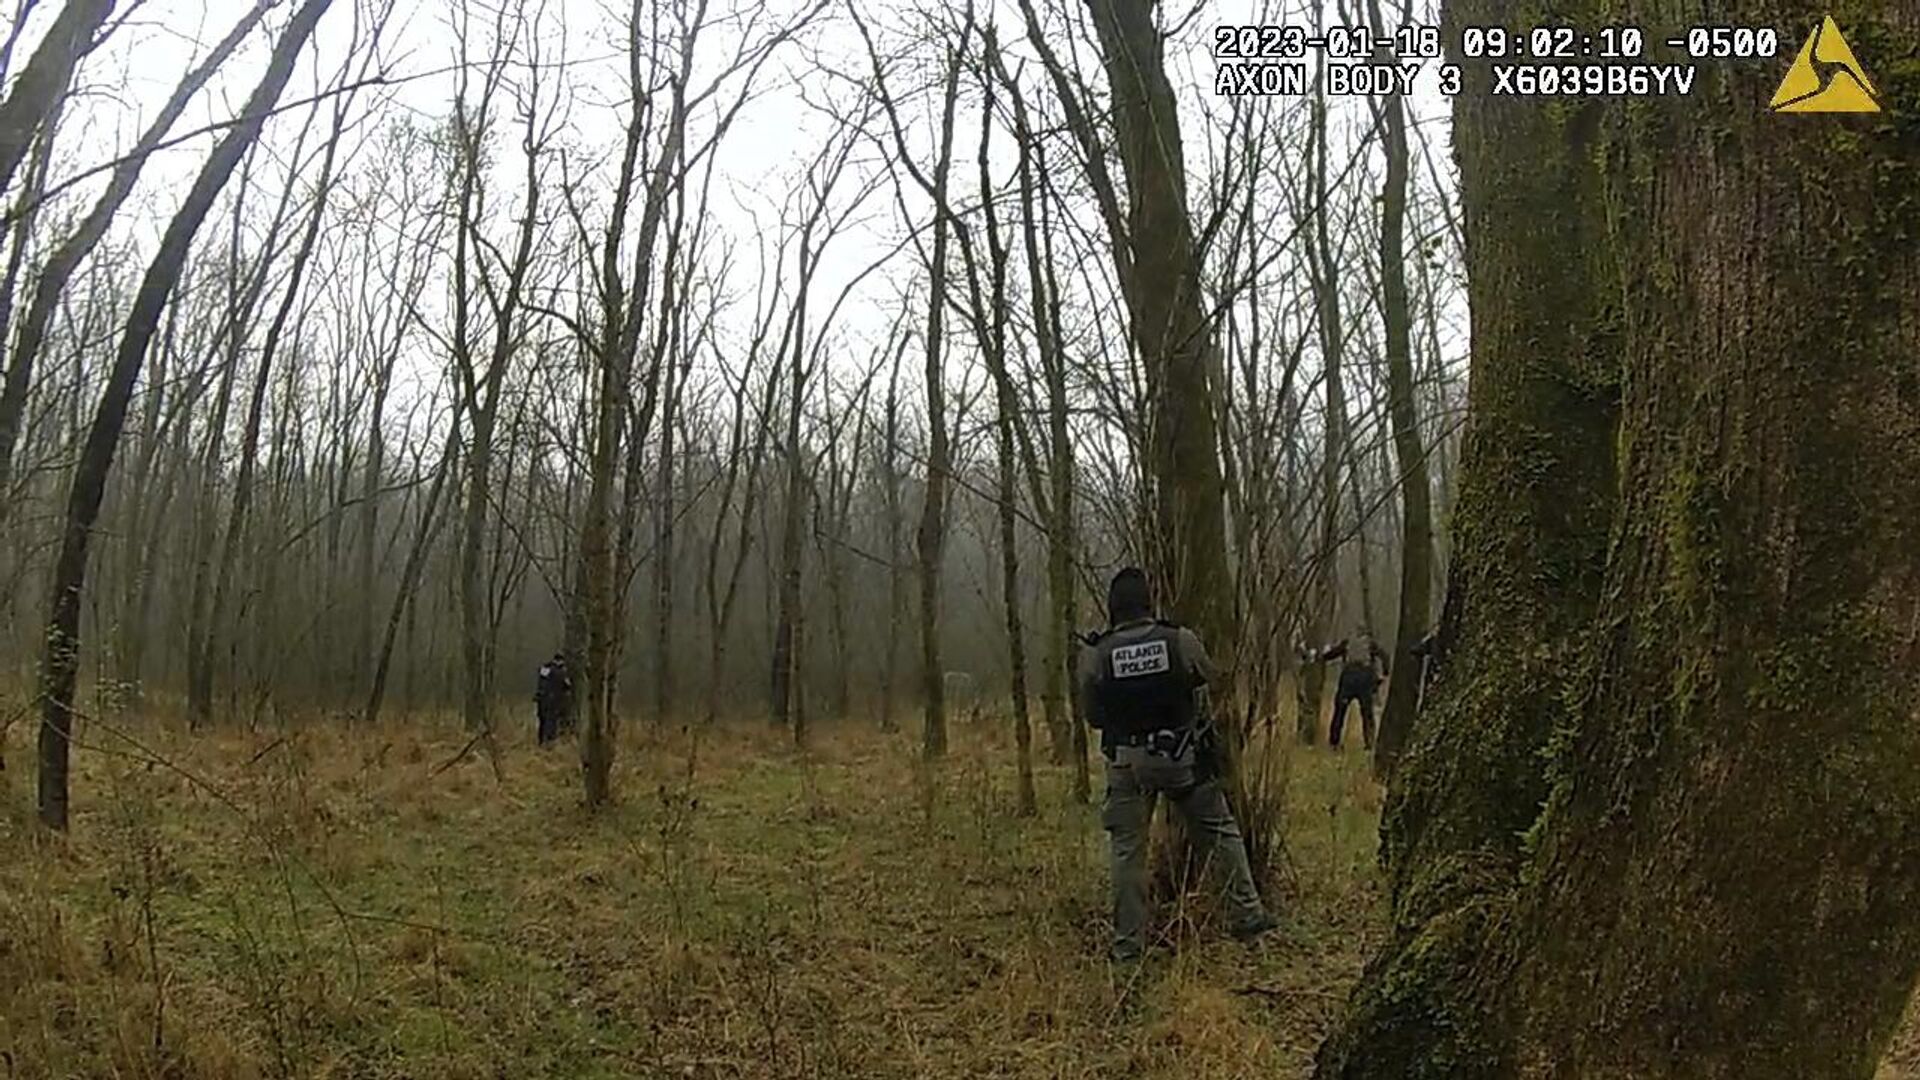 In this image taken from body cam video released by the Atlanta Department, officers stand behind trees after hearing gunfire near the future site of City of Atlanta’s Public Safety Training Center on Jan. 18, 2023, near Atlanta, Ga. Authorities said Manuel Esteban Paez Teran, an environmental activist who went by the name Tortuguita, died at the scene, and a state trooper was injured with a gunshot wound. - Sputnik International, 1920, 21.04.2023